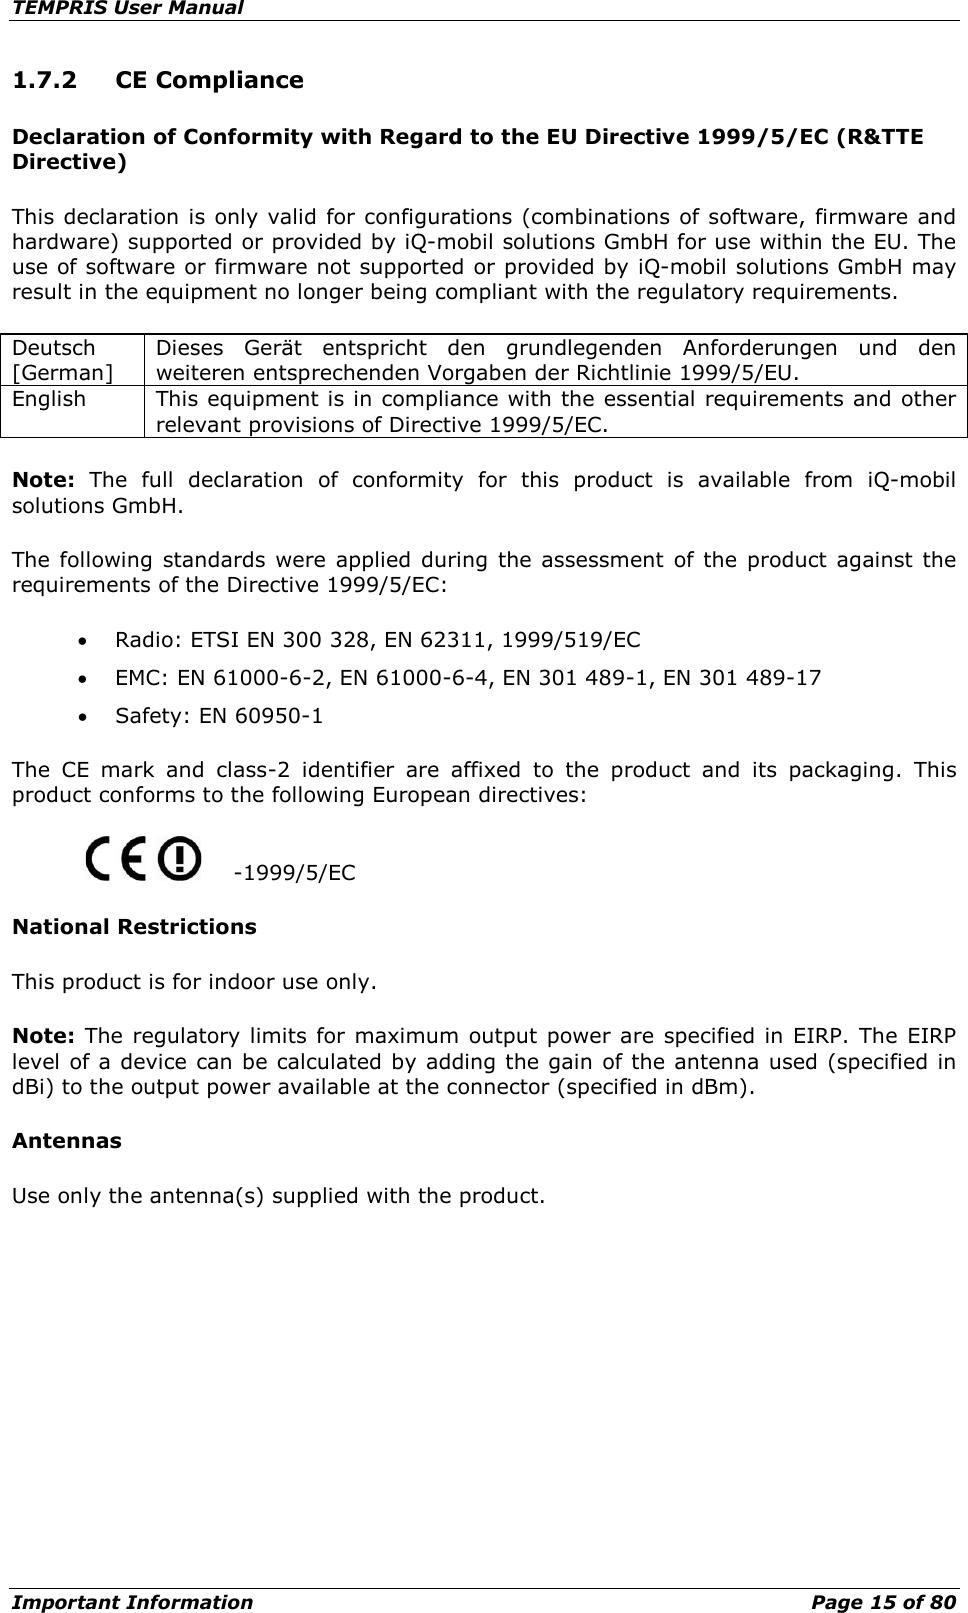 TEMPRIS User Manual Important Information    Page 15 of 80 1.7.2 CE Compliance Declaration of Conformity with Regard to the EU Directive 1999/5/EC (R&amp;TTE Directive) This declaration is only valid for configurations (combinations of software, firmware and hardware) supported or provided by iQ-mobil solutions GmbH for use within the EU. The use of software or firmware not supported or provided by iQ-mobil solutions GmbH may result in the equipment no longer being compliant with the regulatory requirements. Deutsch [German] Dieses Gerät entspricht den grundlegenden Anforderungen und den weiteren entsprechenden Vorgaben der Richtlinie 1999/5/EU. English This equipment is in compliance with the essential requirements and other relevant provisions of Directive 1999/5/EC. Note:  The full declaration of conformity for this product is available from iQ-mobil solutions GmbH. The following standards were applied during the assessment of the product against the requirements of the Directive 1999/5/EC: • Radio: ETSI EN 300 328, EN 62311, 1999/519/EC • EMC: EN 61000-6-2, EN 61000-6-4, EN 301 489-1, EN 301 489-17 • Safety: EN 60950-1 The CE mark and class-2 identifier are affixed to the product and its packaging. This product conforms to the following European directives:   -1999/5/EC National Restrictions This product is for indoor use only. Note:  The regulatory limits for maximum output power are specified in EIRP. The EIRP level of a device can be calculated by adding the gain of the antenna used (specified in dBi) to the output power available at the connector (specified in dBm). Antennas Use only the antenna(s) supplied with the product.    